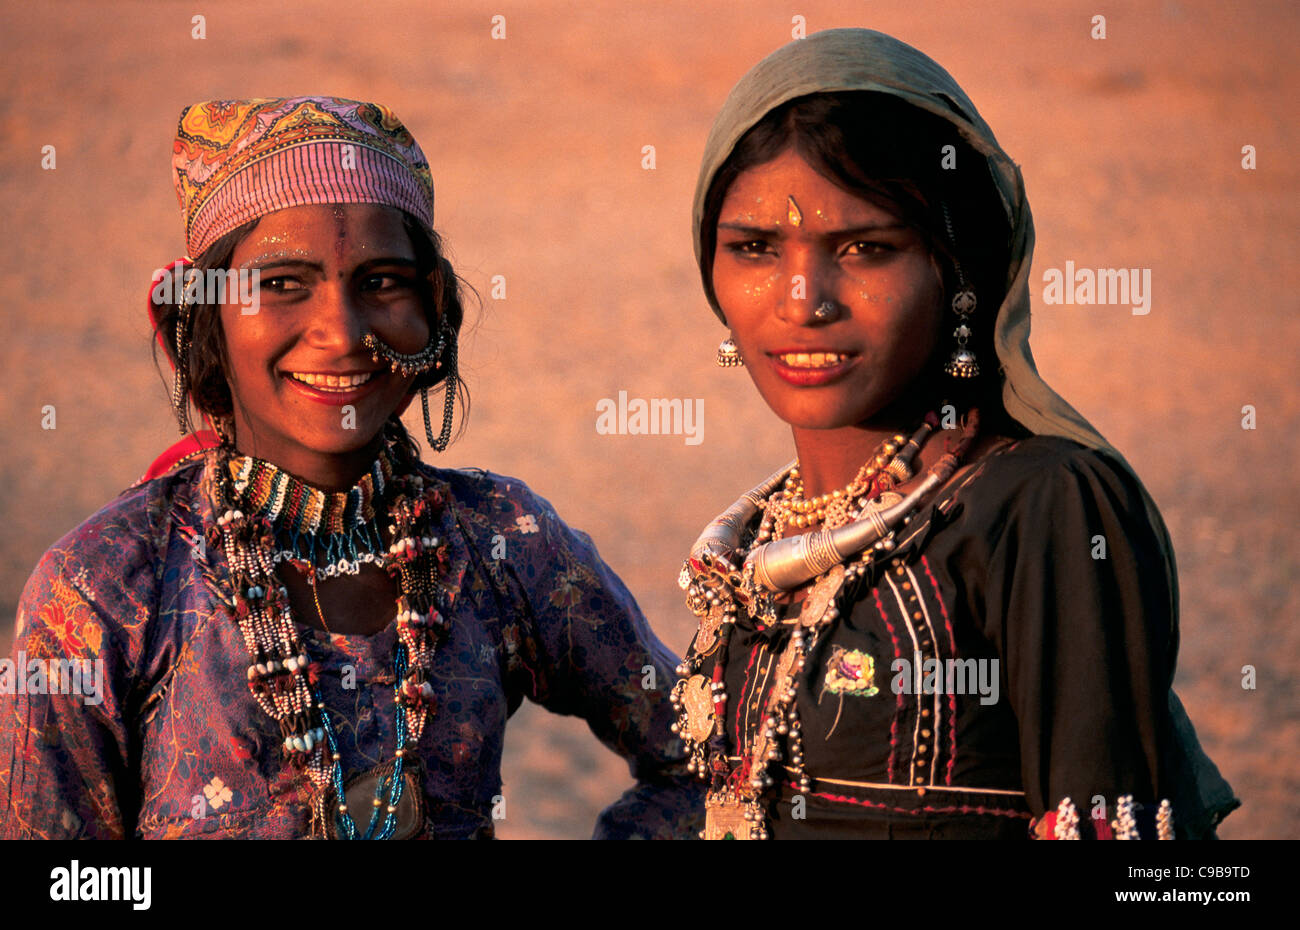 Festival time for these girls belonging to a nomadic group living in the Thar desert ( India) Stock Photo